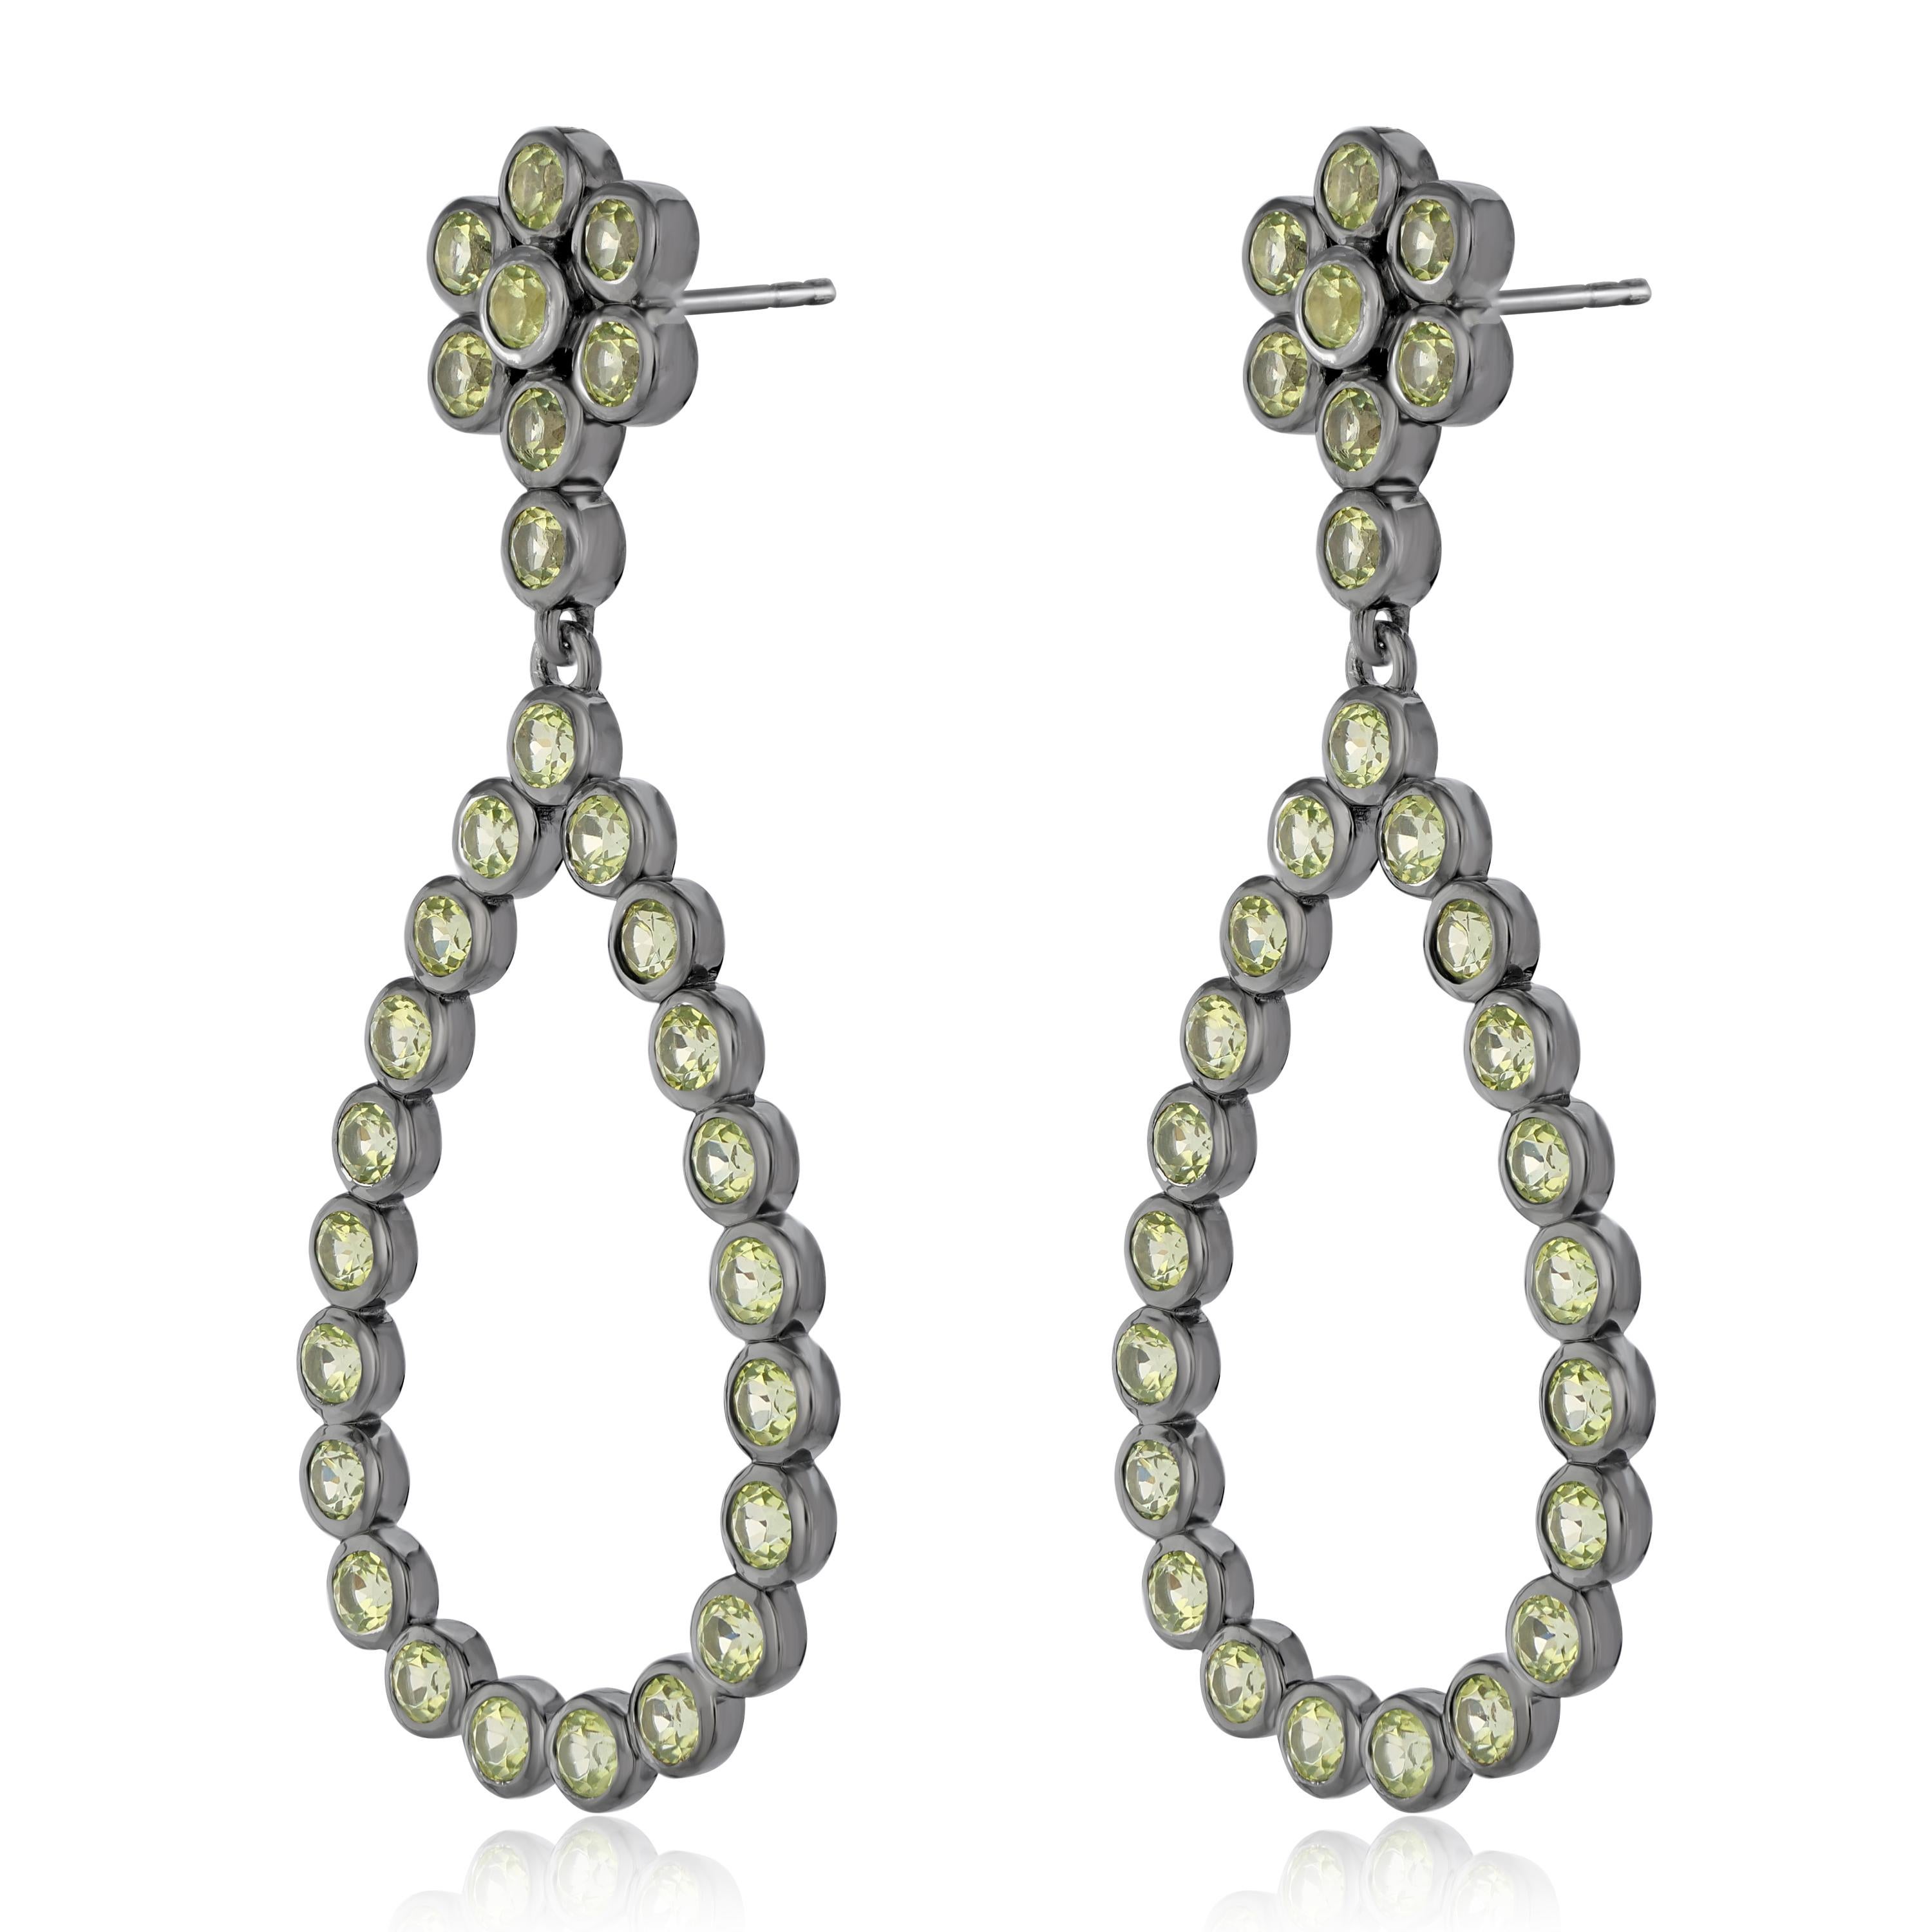 Known to be the birthstone for the month of august, peridot protects the wearer from sadness. These women's earrings feature 3 mm peridot 7.54 Ct  arranged in a floral and open teardrop design. These earrings are crafted in genuine and nickel free